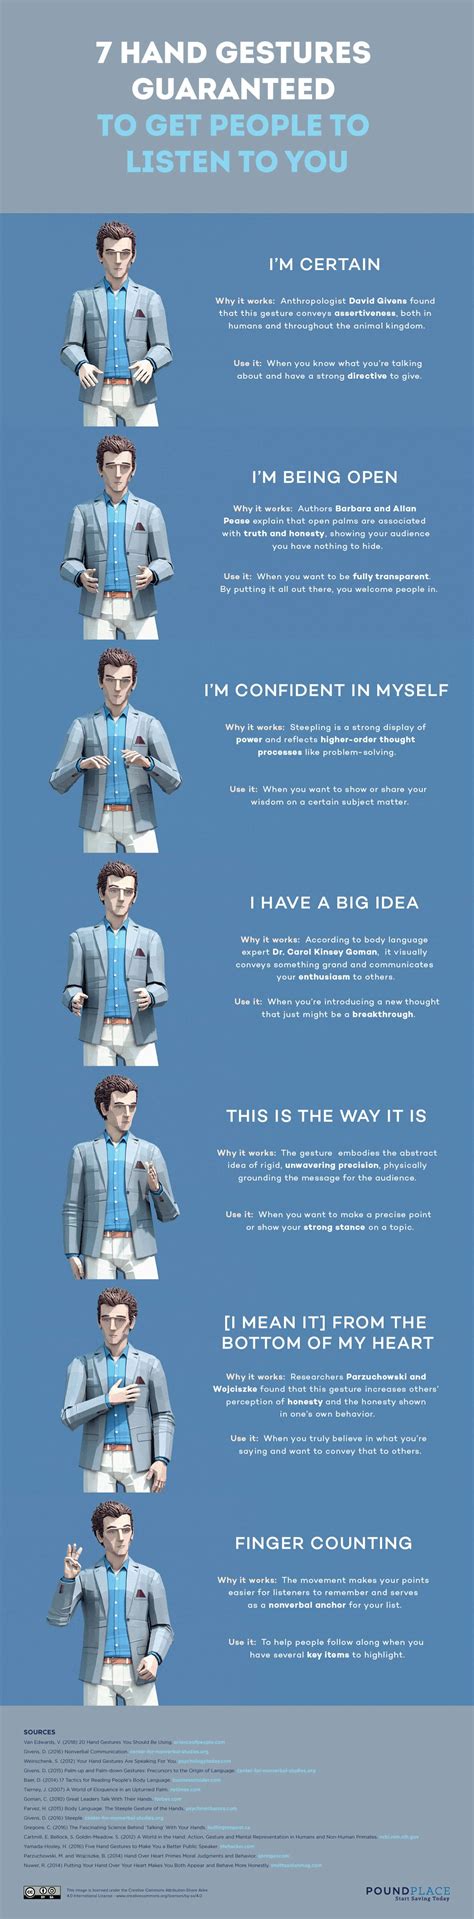 7 Hand Gestures To Get People To Listen To You Infographic